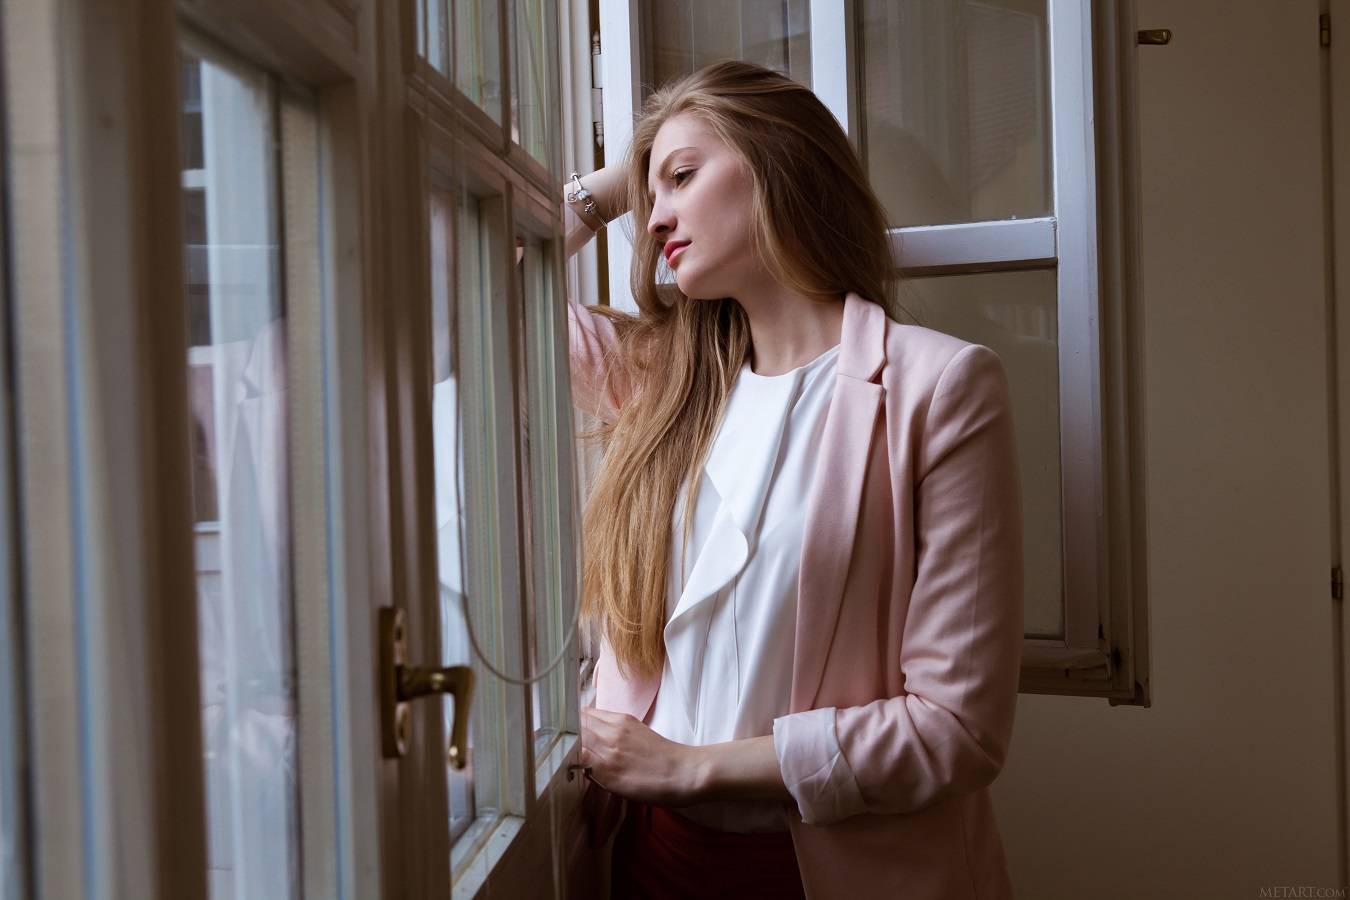 Long Hair Brunette Model Looking Out Window Jacket Pink Jacket White Shirt Red Lipstick Looking Away 1350x900